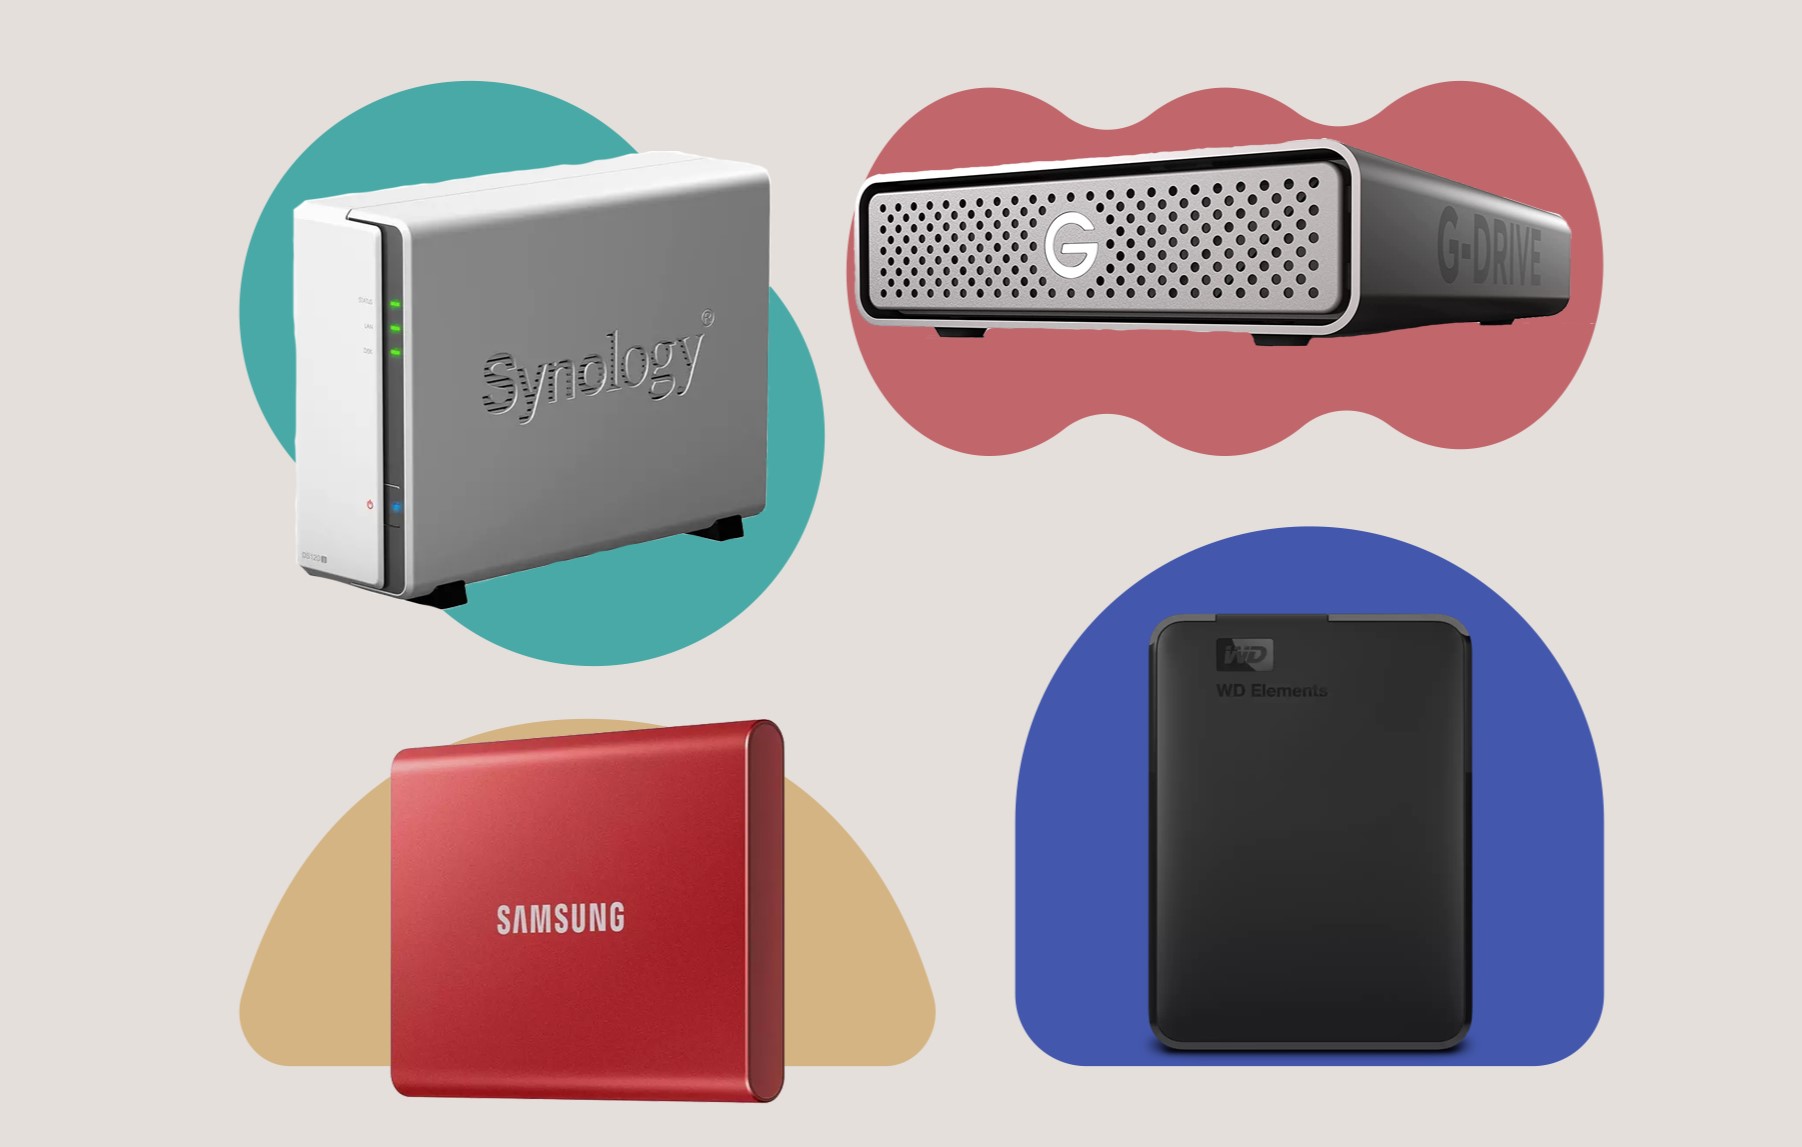 Top External Hard Drive Review: Find the Best Storage Solution